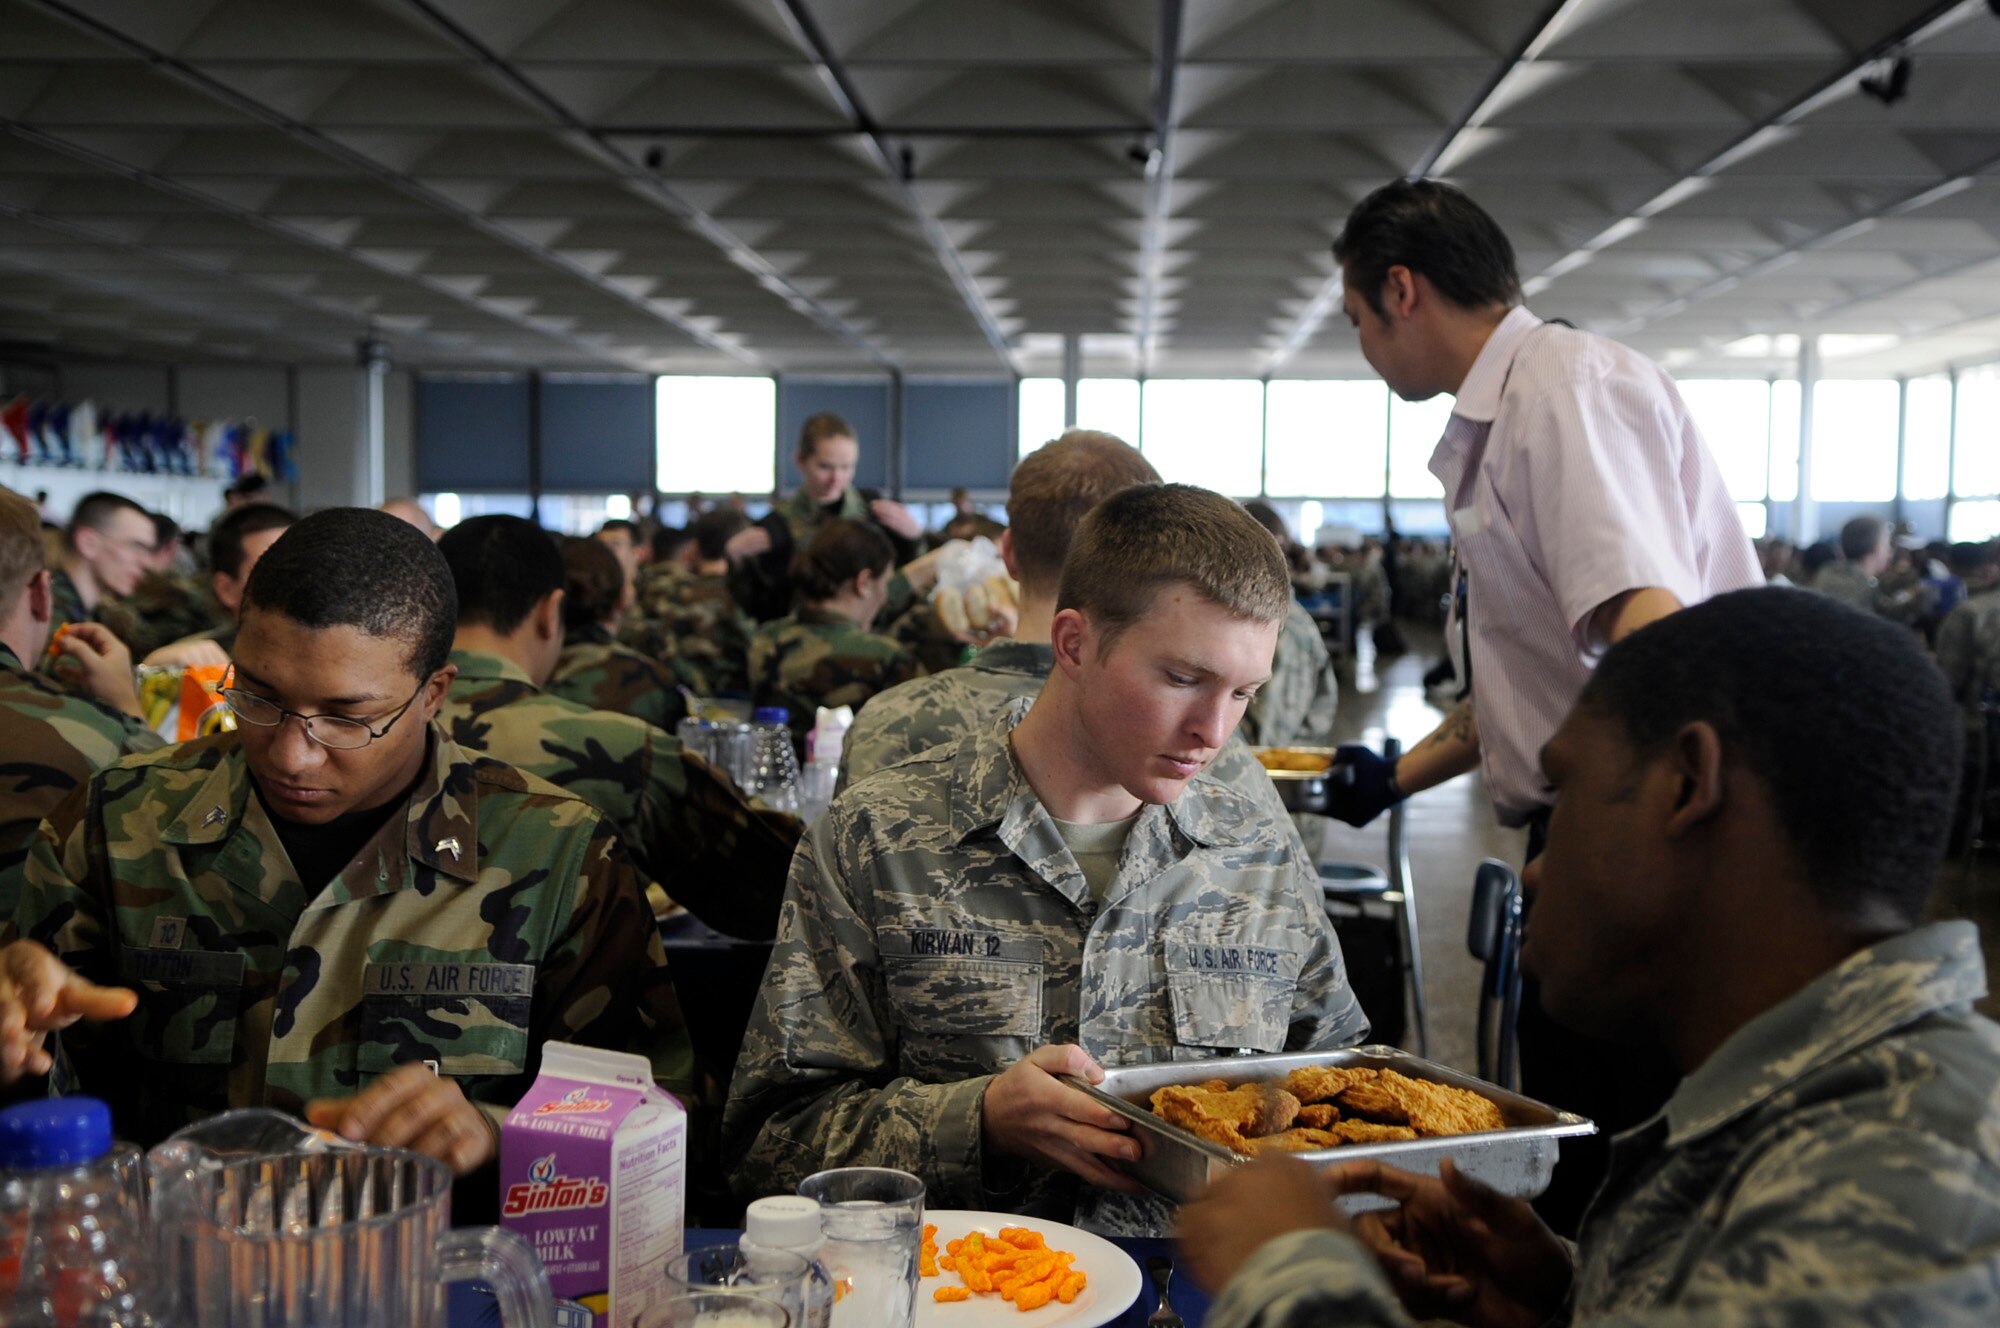 Cadets pass around fried chicken during lunch Jan. 23 at Mitchell Hall Cadet Dining Facility at the U.S. Air Force Academy in Colorado Springs, Colo. The dining facility feeds approximately 4450 cadets and sits on 1.75 acres. (U.S Air Force photo/Staff Sgt. Desiree N. Palacios)